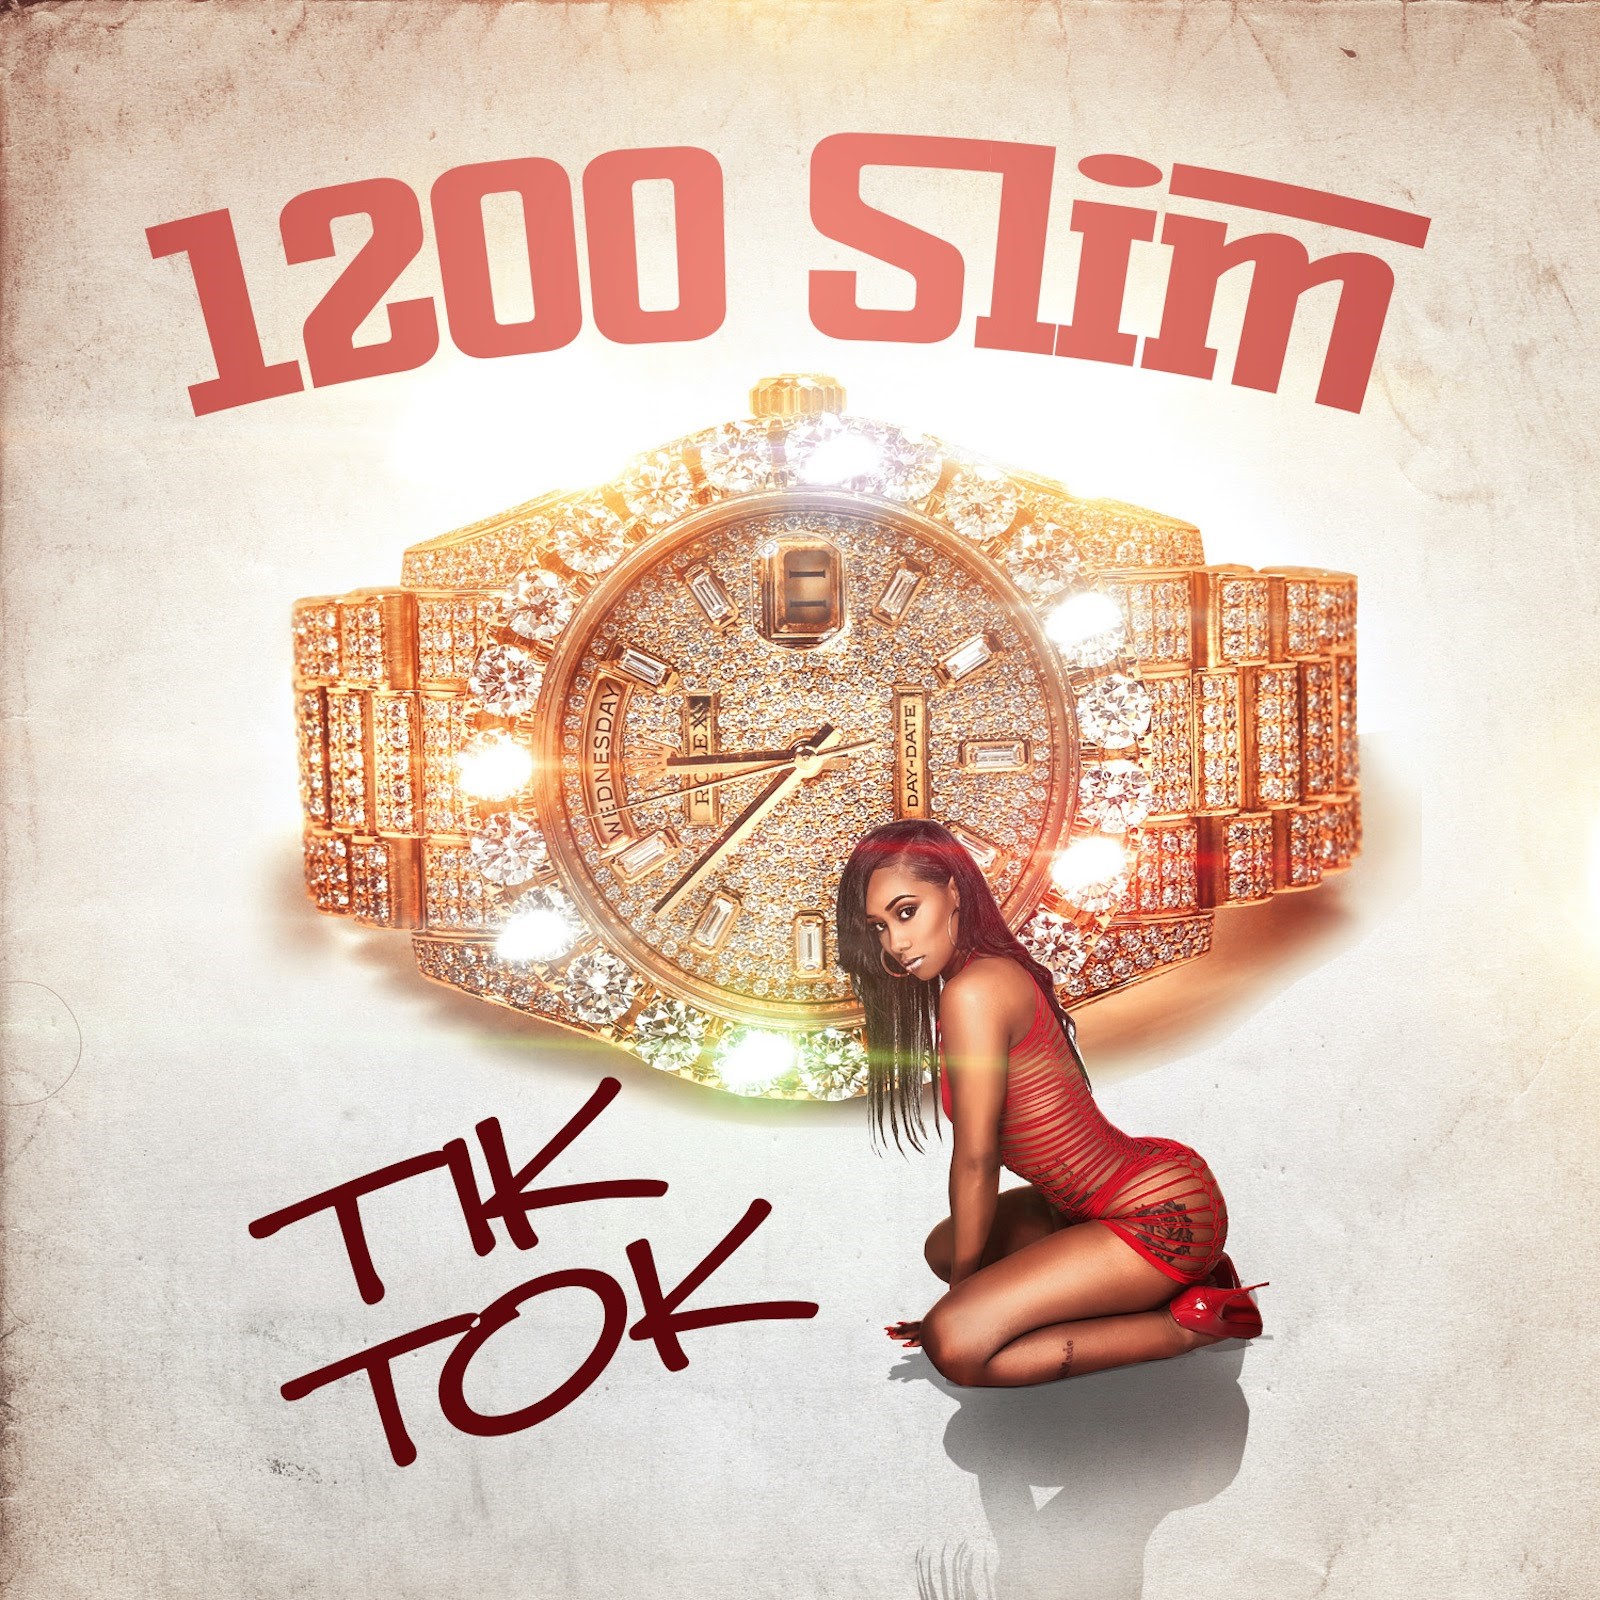 1200 Slim Is In The Fast Lane With New Album-Teaser Joint ‘Tik Tok’